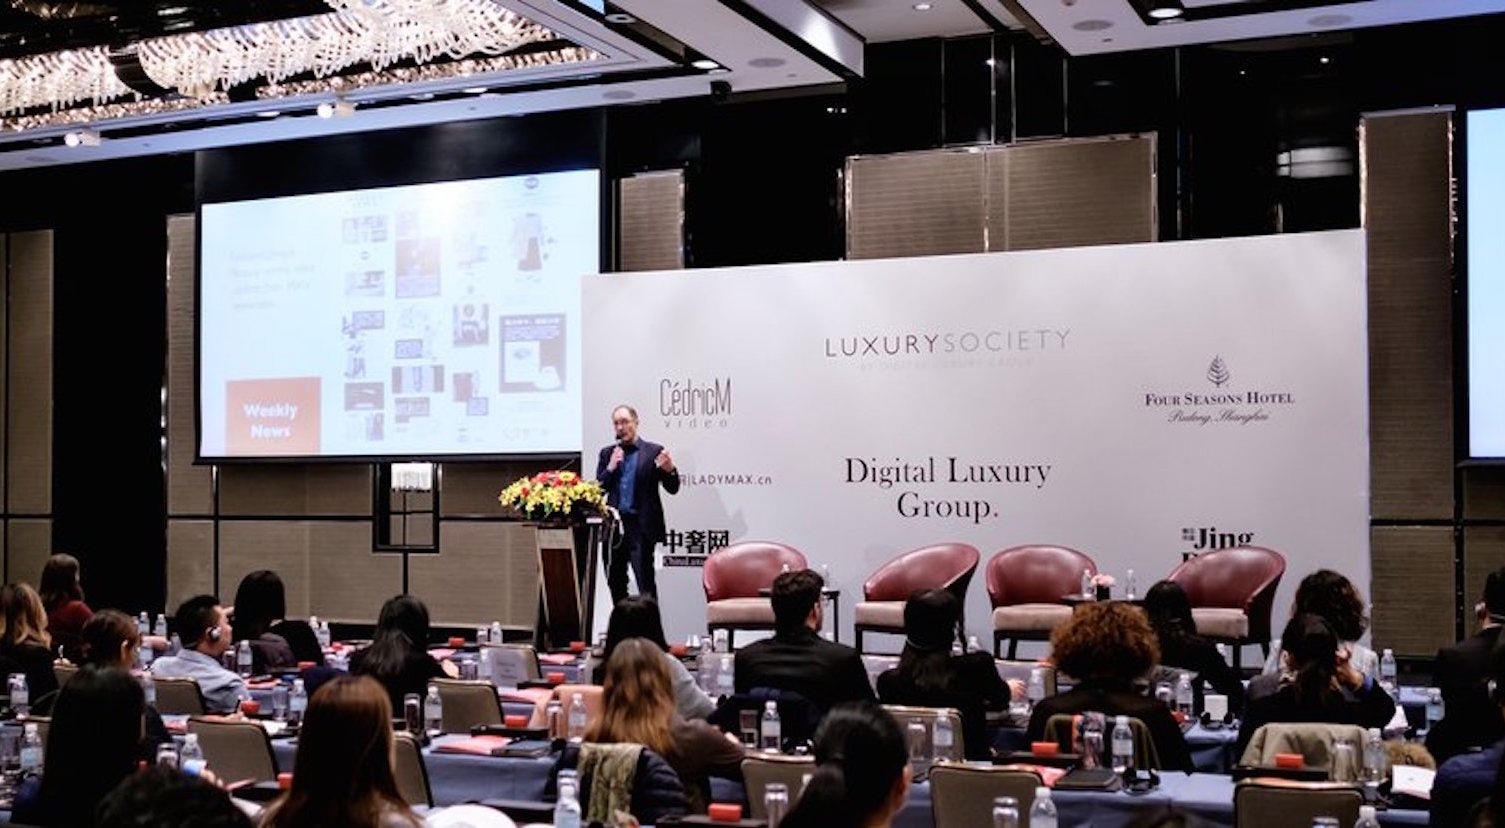 Mei.com Co-Founder and CEO Thibault Villet discusses China's e-commerce market at Luxury Society's recent conference in Shanghai. (Courtesy Photo)